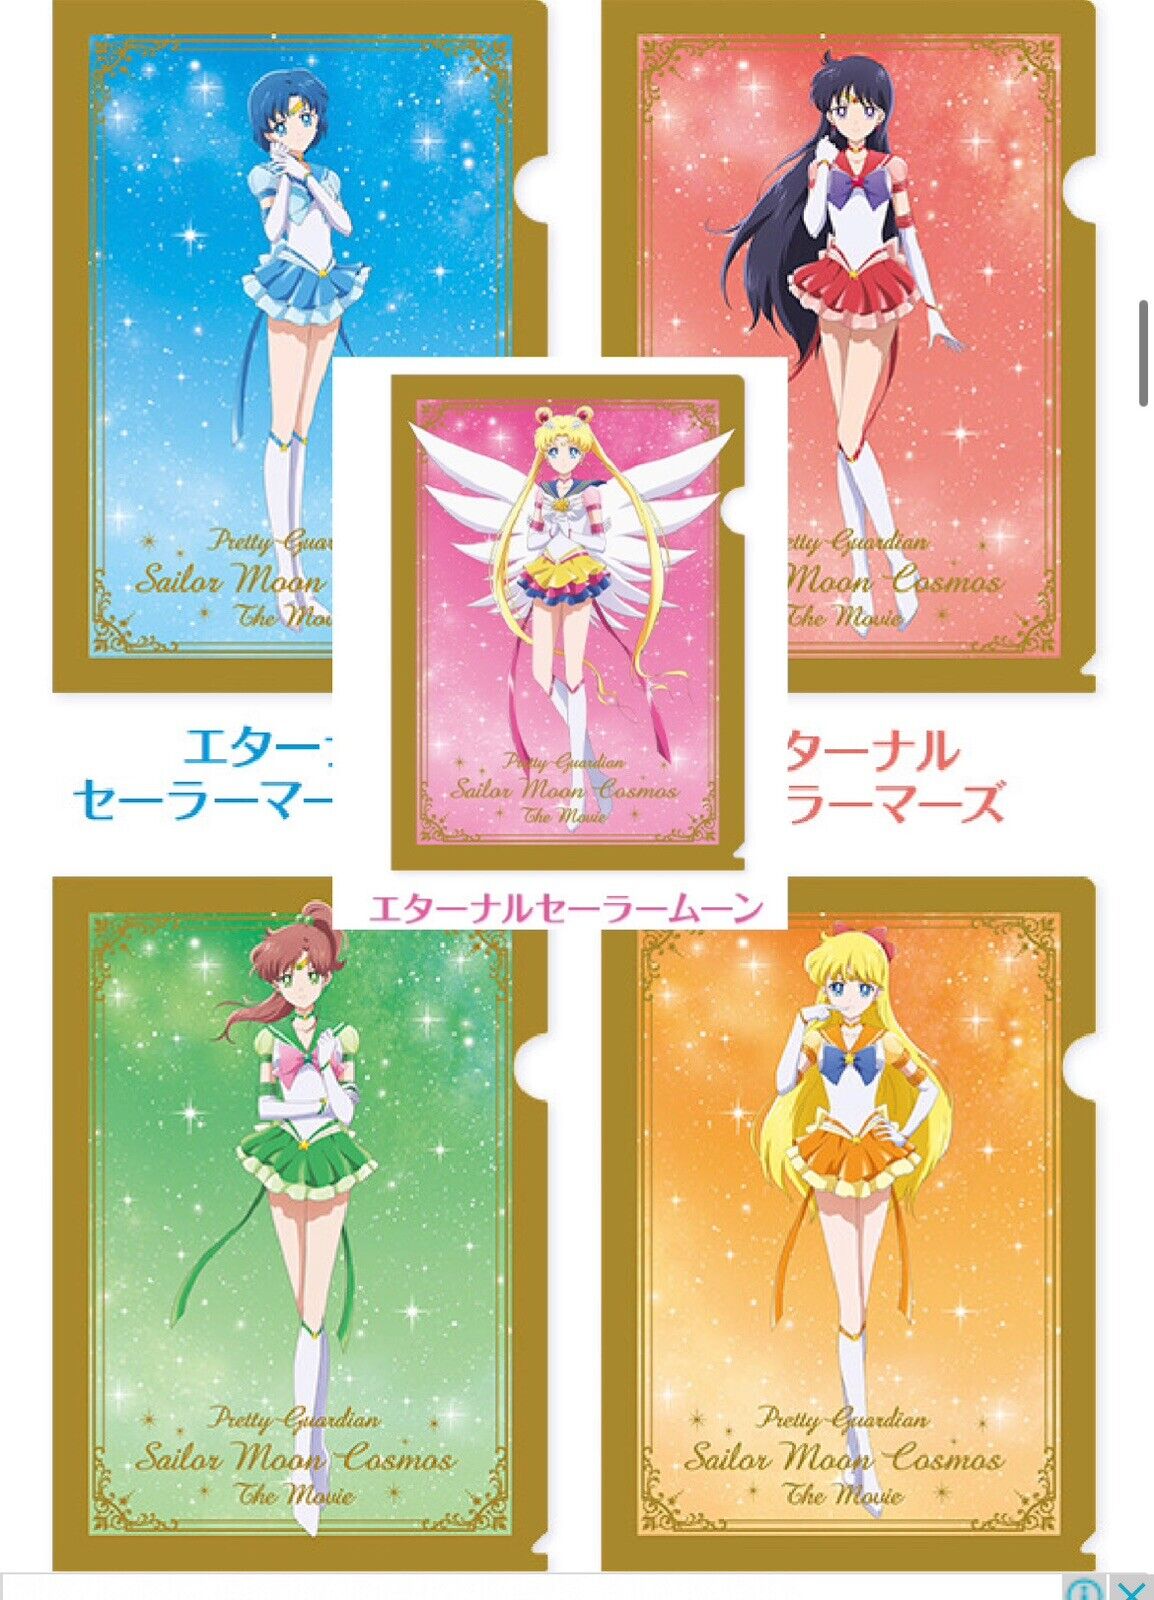 Sailor Moon File Folder,from the movie Sailor Moon Cosmos,full sets.A4 size